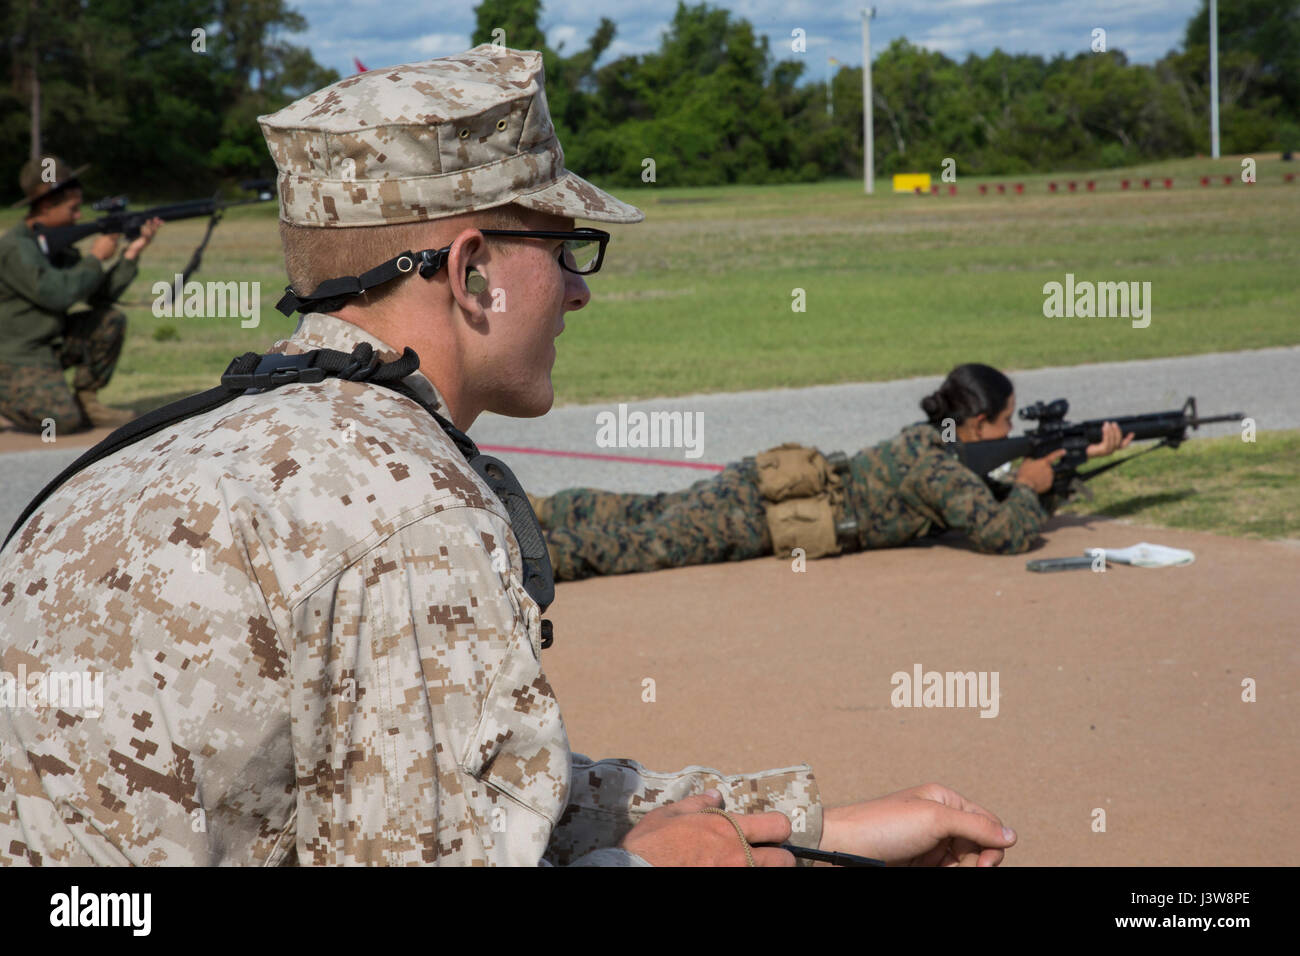 U.S. Marine Corps Rct. Andre Salomon, platoon 2041, Company G., 2nd  Battalion, Recruit Training Regiment, observes targets during  qualifications at the rifle range on Marine Corps Recruit Depot, Parris  Island, S.C., May